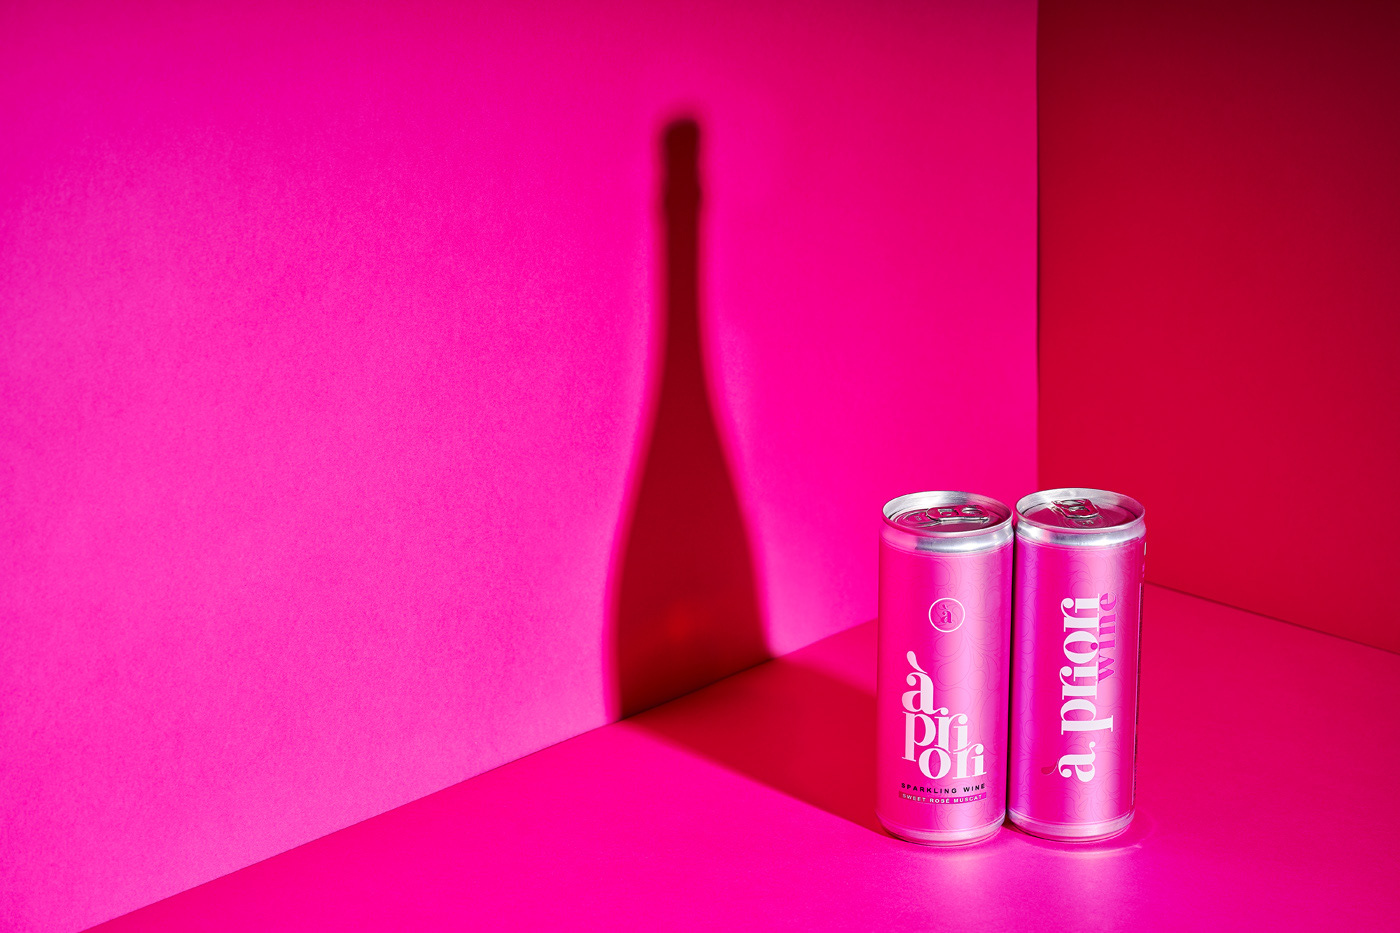 apriori canned wine color hiddenhallow Moldova Photography  Product Photography sparkling wine vivid wine photography